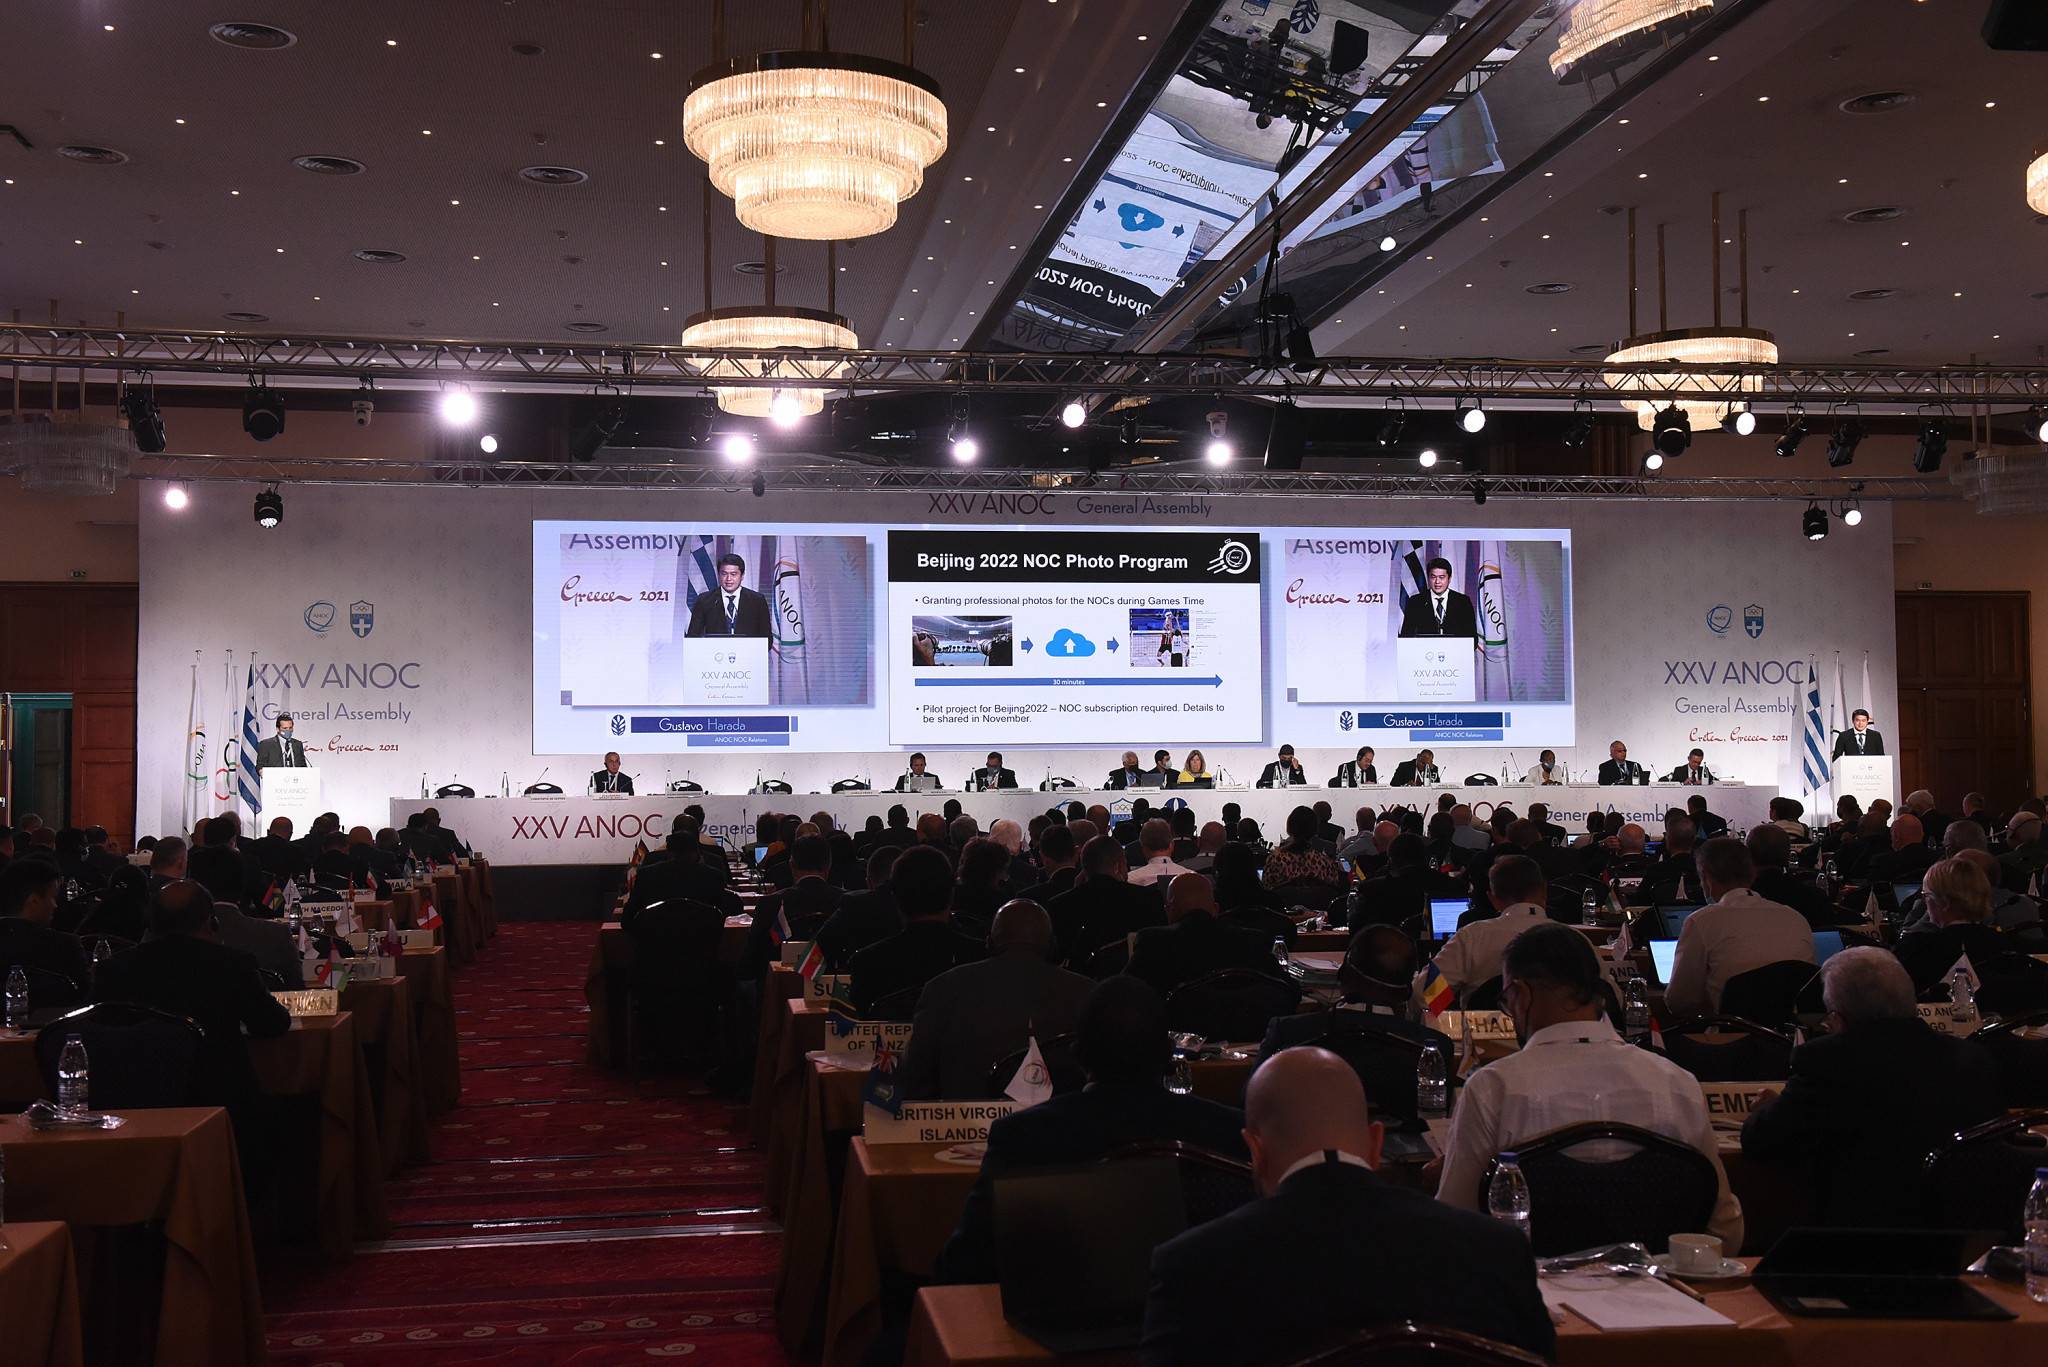 The ANOC General Assembly was held in Crete in October this year ©ANOC